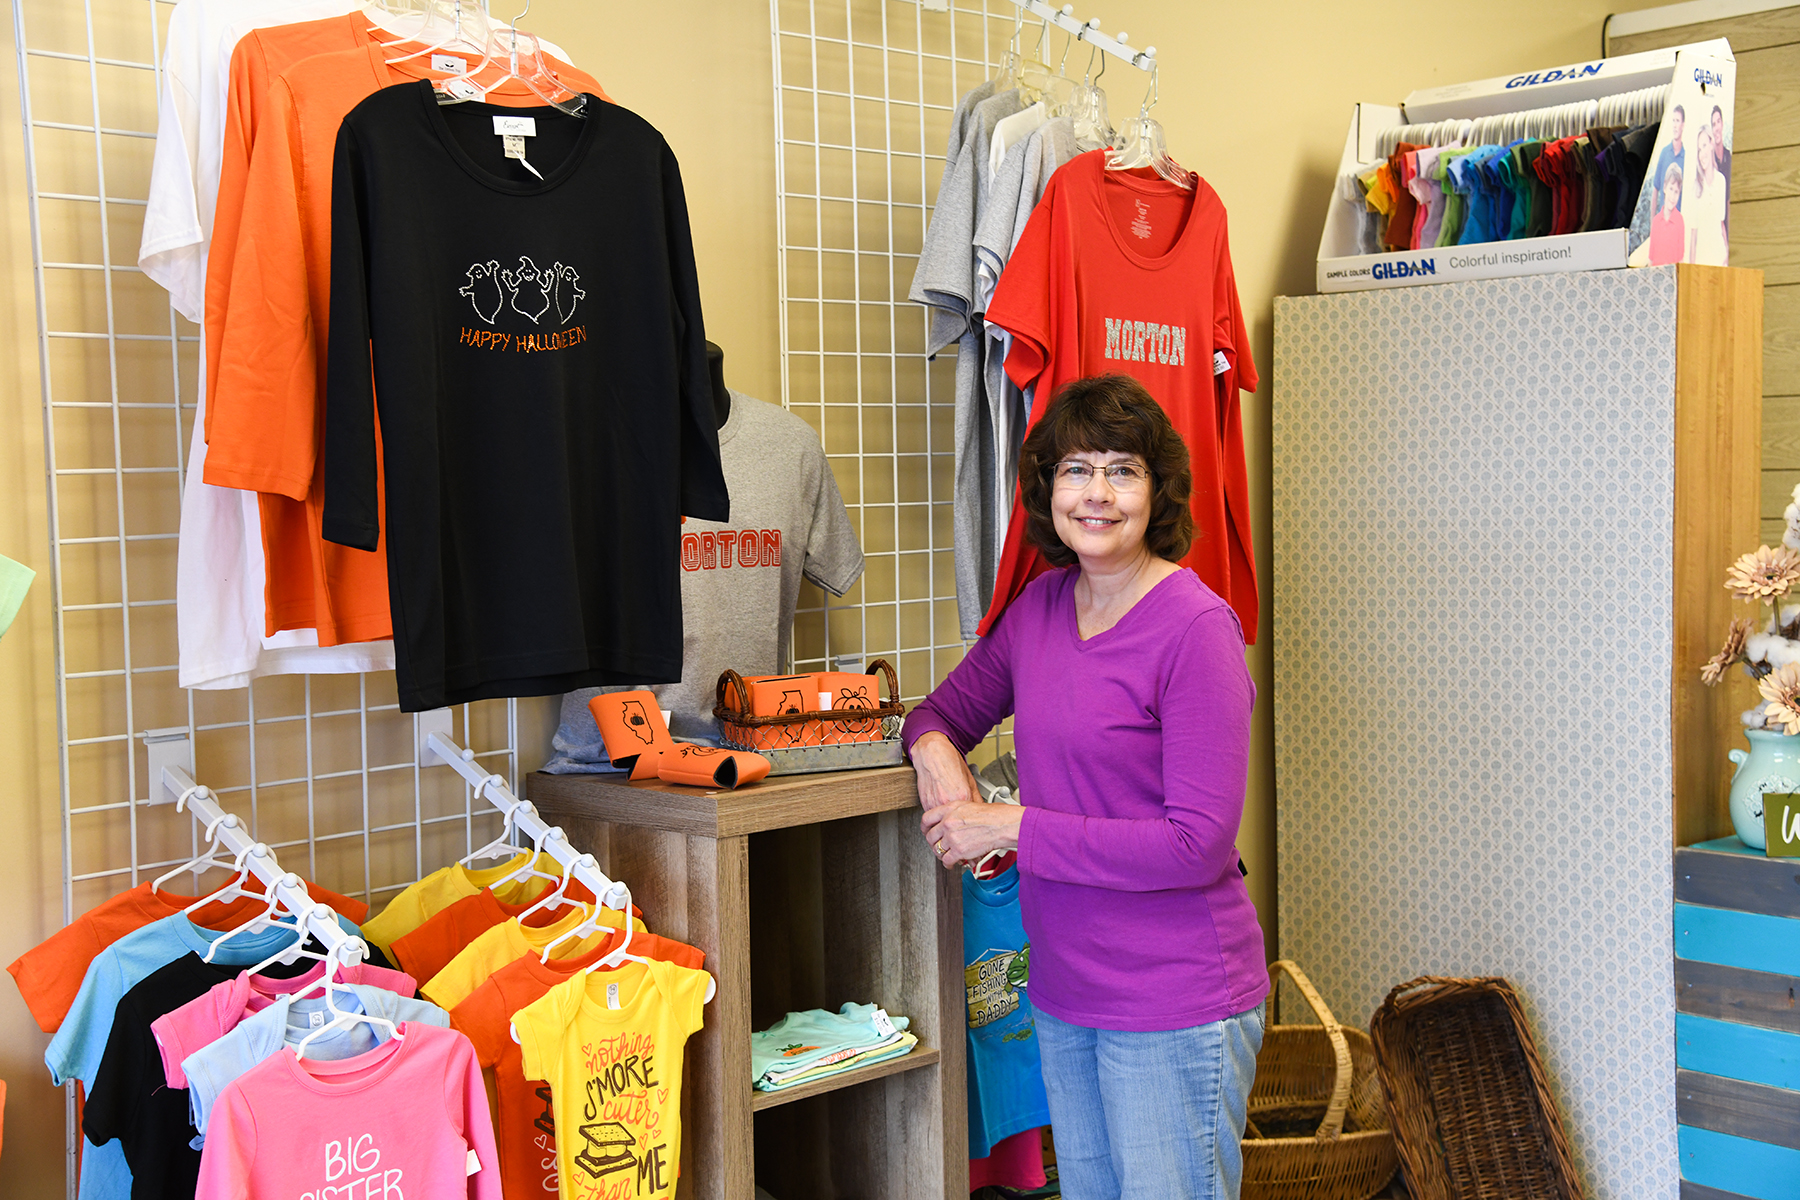 Owner, Teresa, at The Cotton Top in Morton, IL.